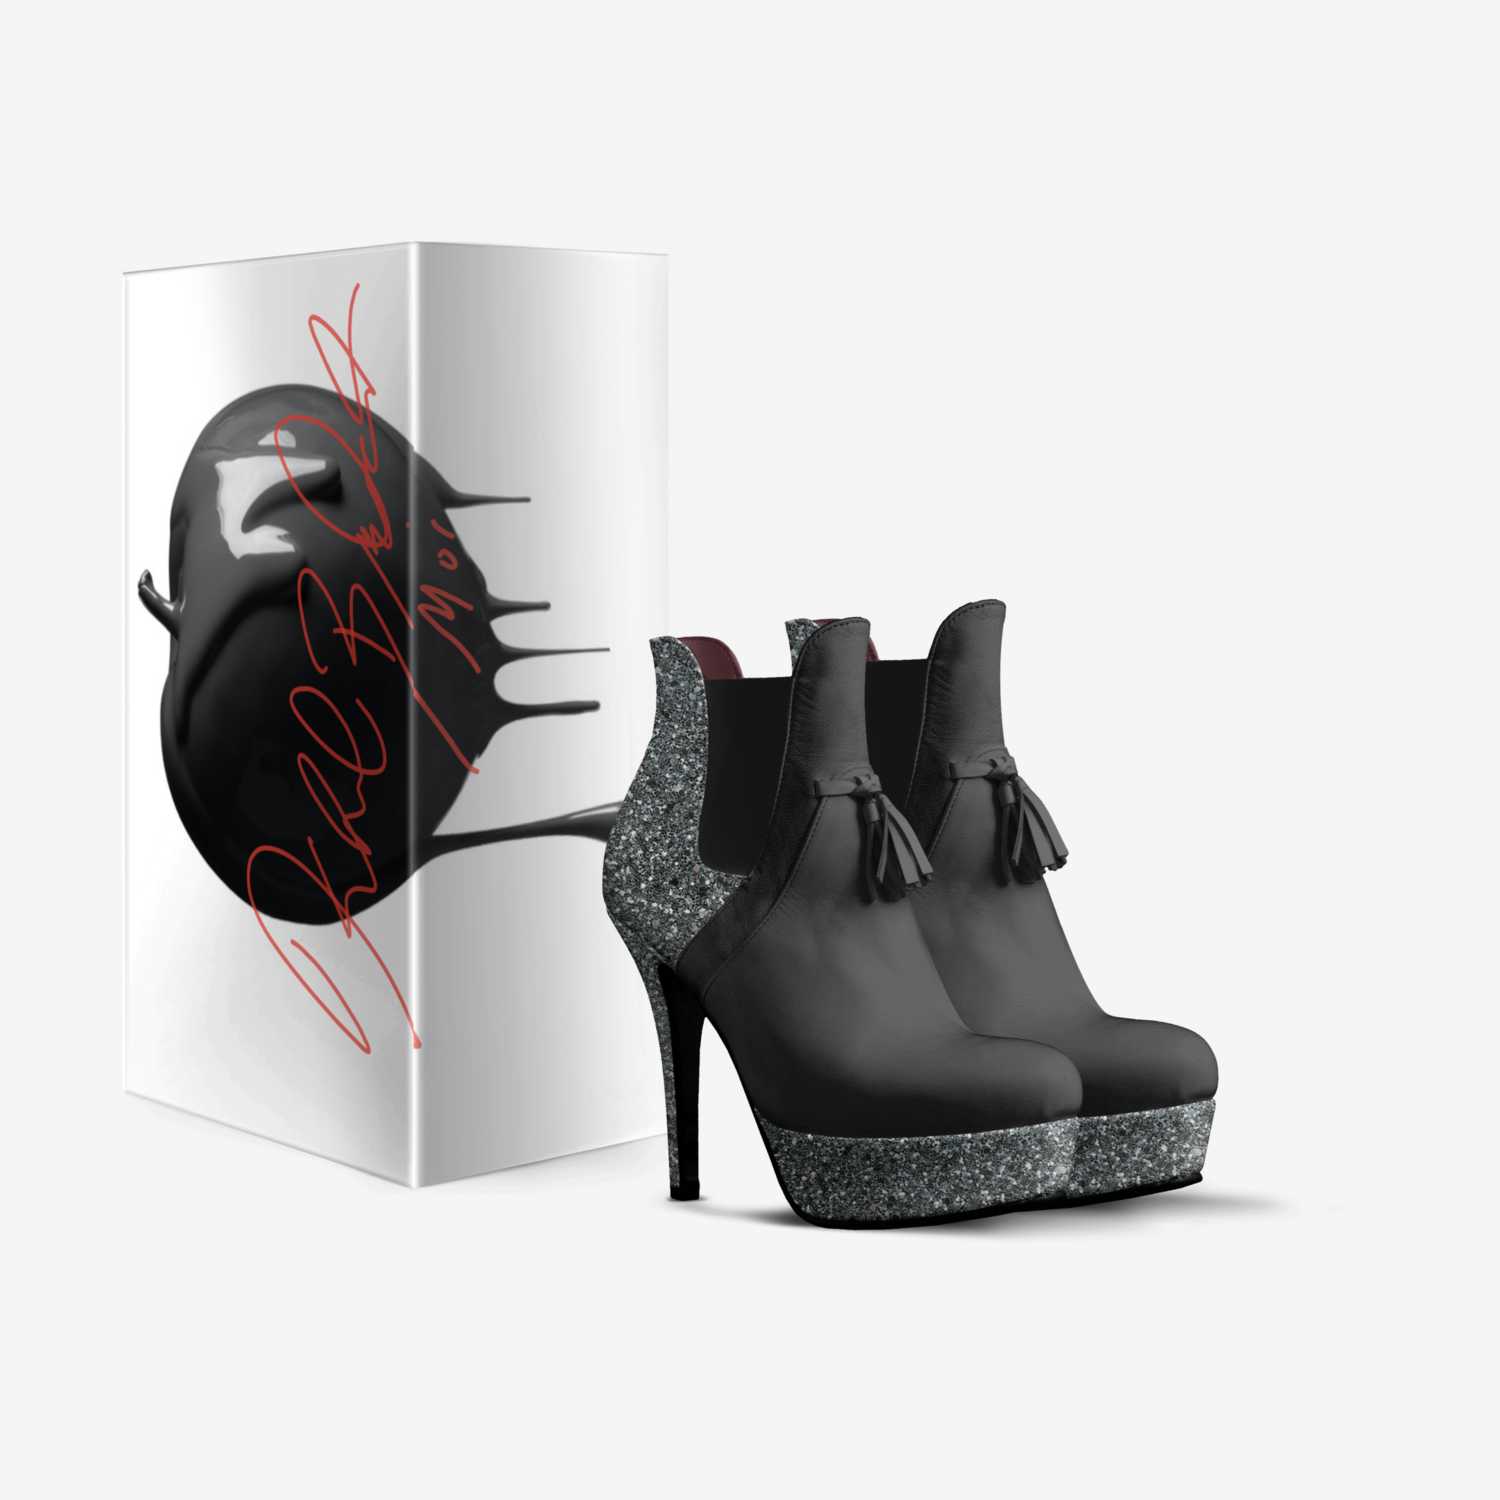 K. Bshaw custom made in Italy shoes by Khalid Bradshaw | Box view